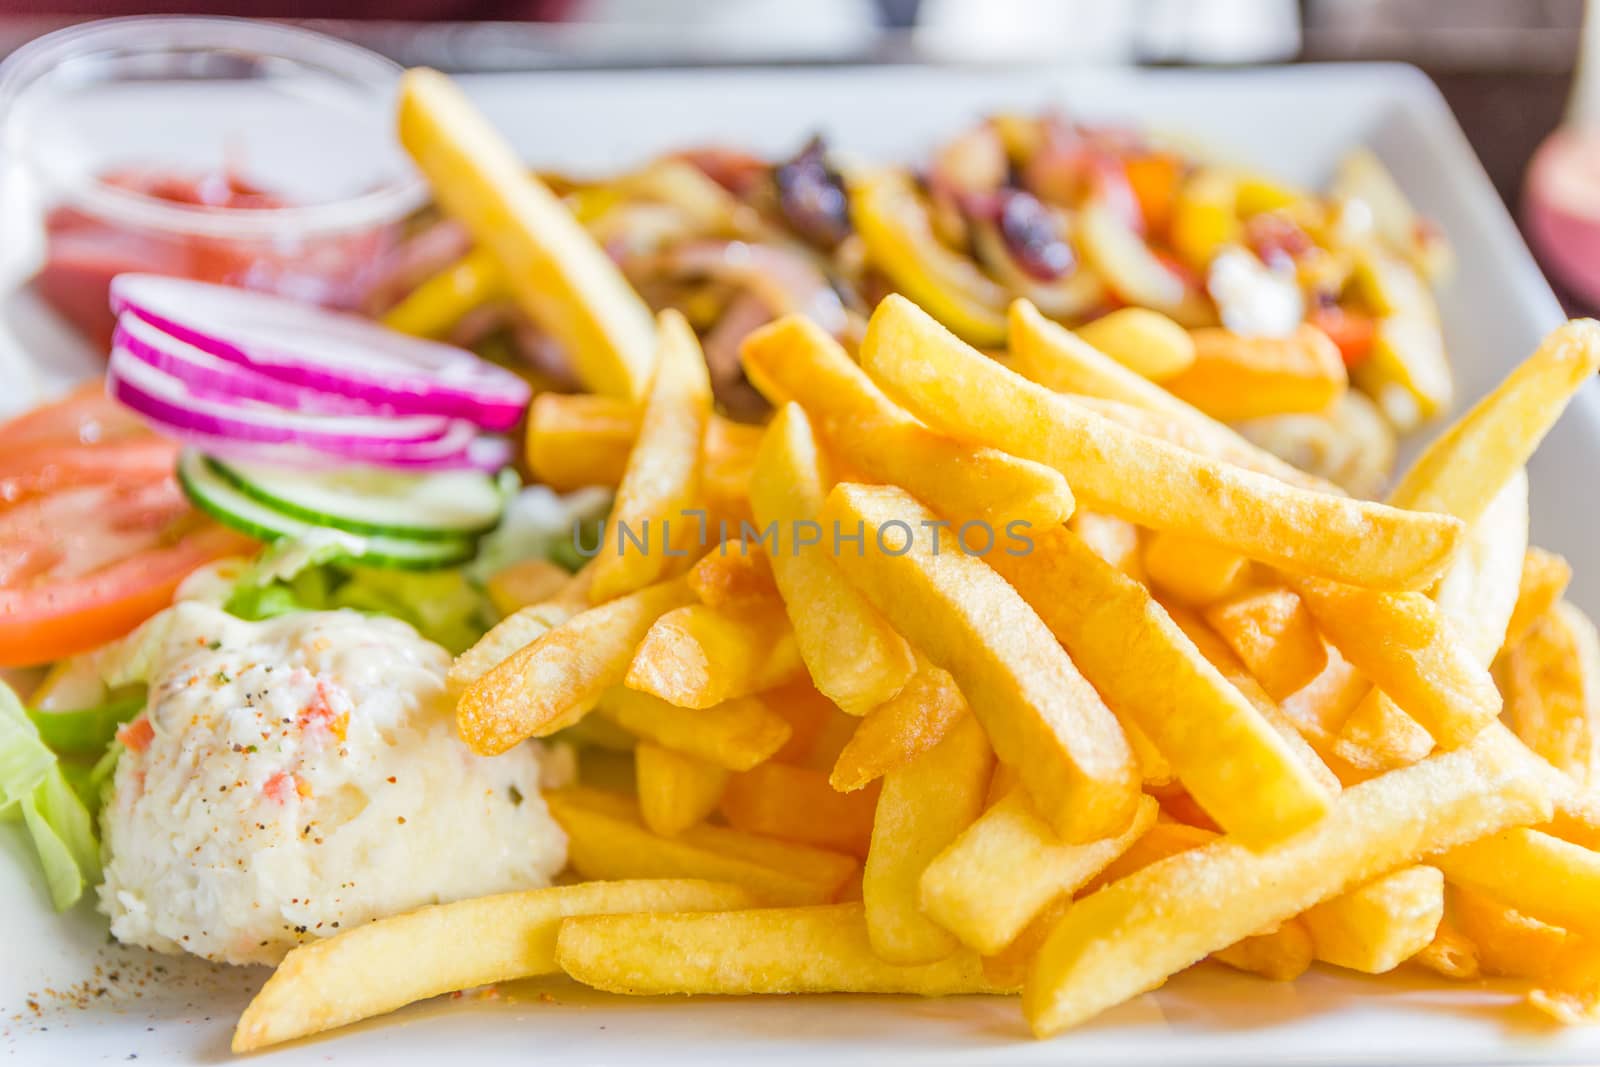 Plate full of French fries